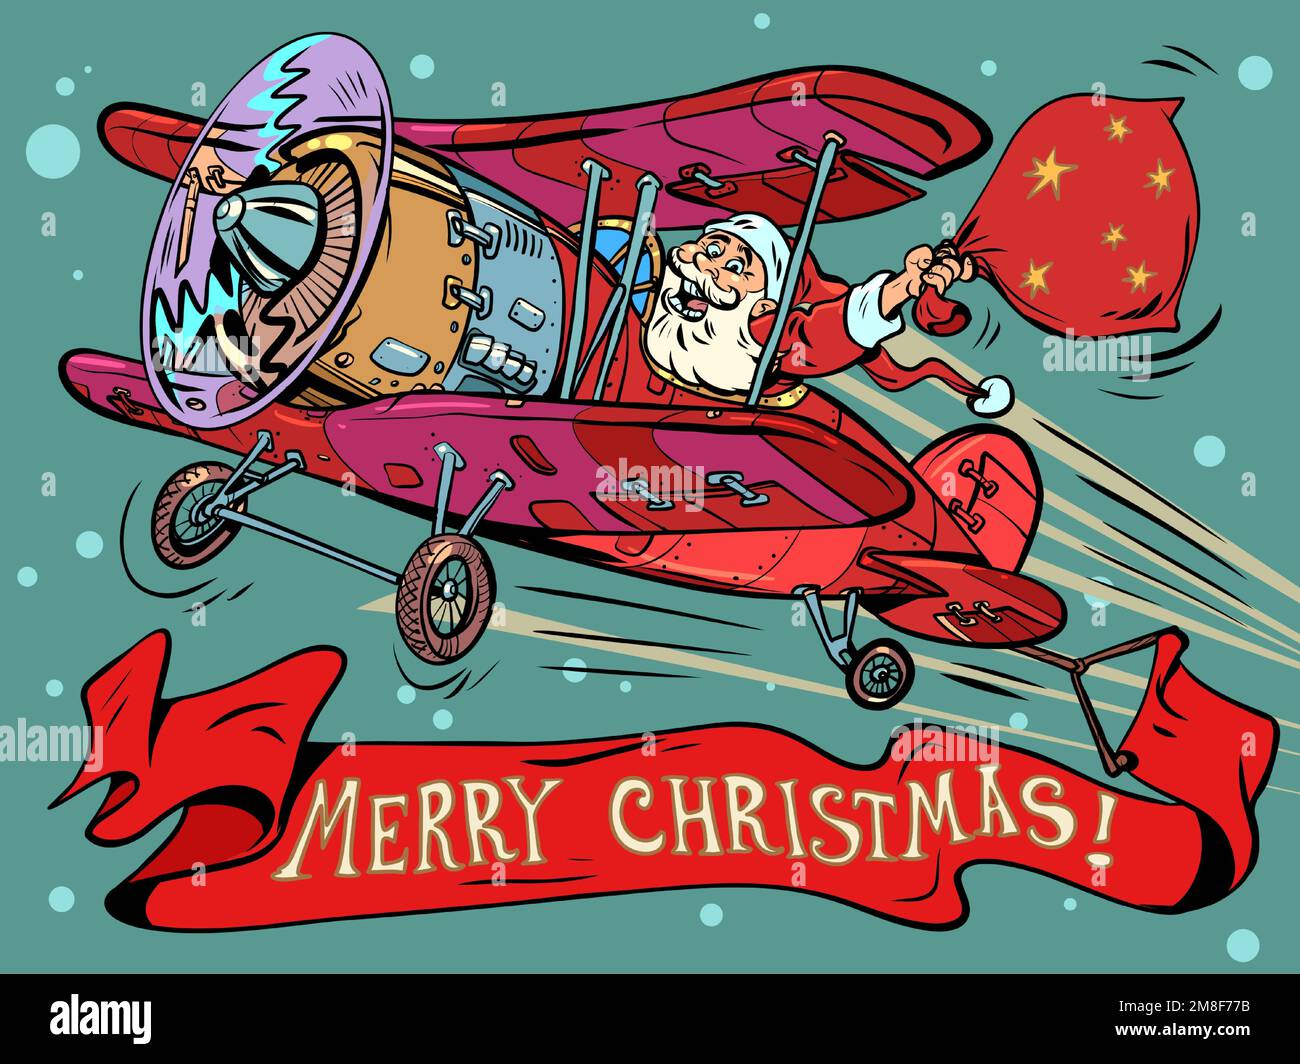 Santa claus with gifts flies on a retro plane. Merry christmas inscription. Holidays and new year theme. Cheerful old man character with a beard Stock Vector